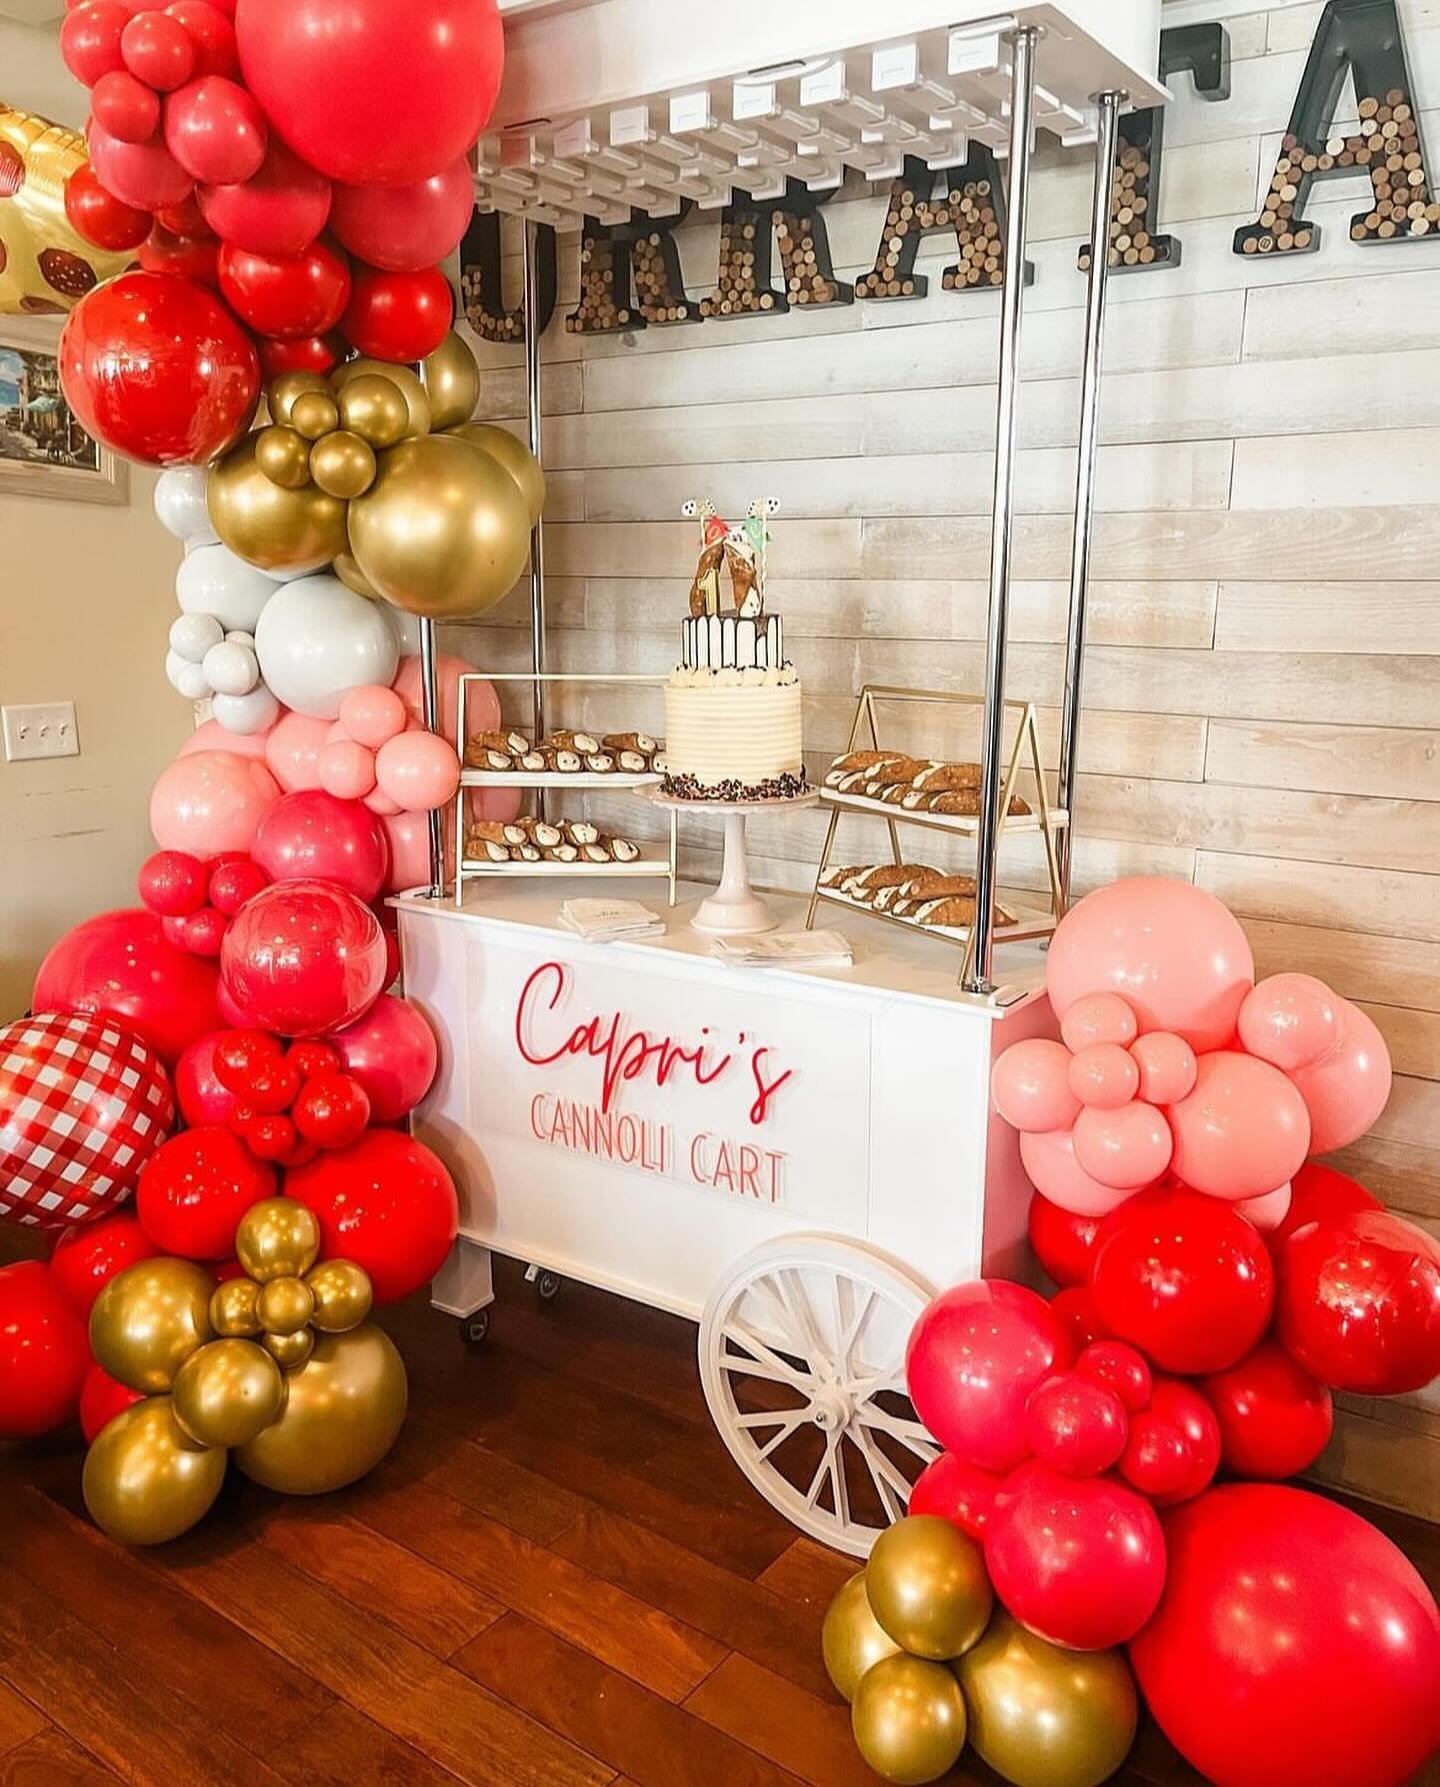 Capri&rsquo;s cannoli cart for her first bday!!!
how stinkin cute 

cake by @sweetwilhelminas 
balloons by @nuffinbuttaluv 
cart by @cartandsoulcelebrations 
signage by dis bitch